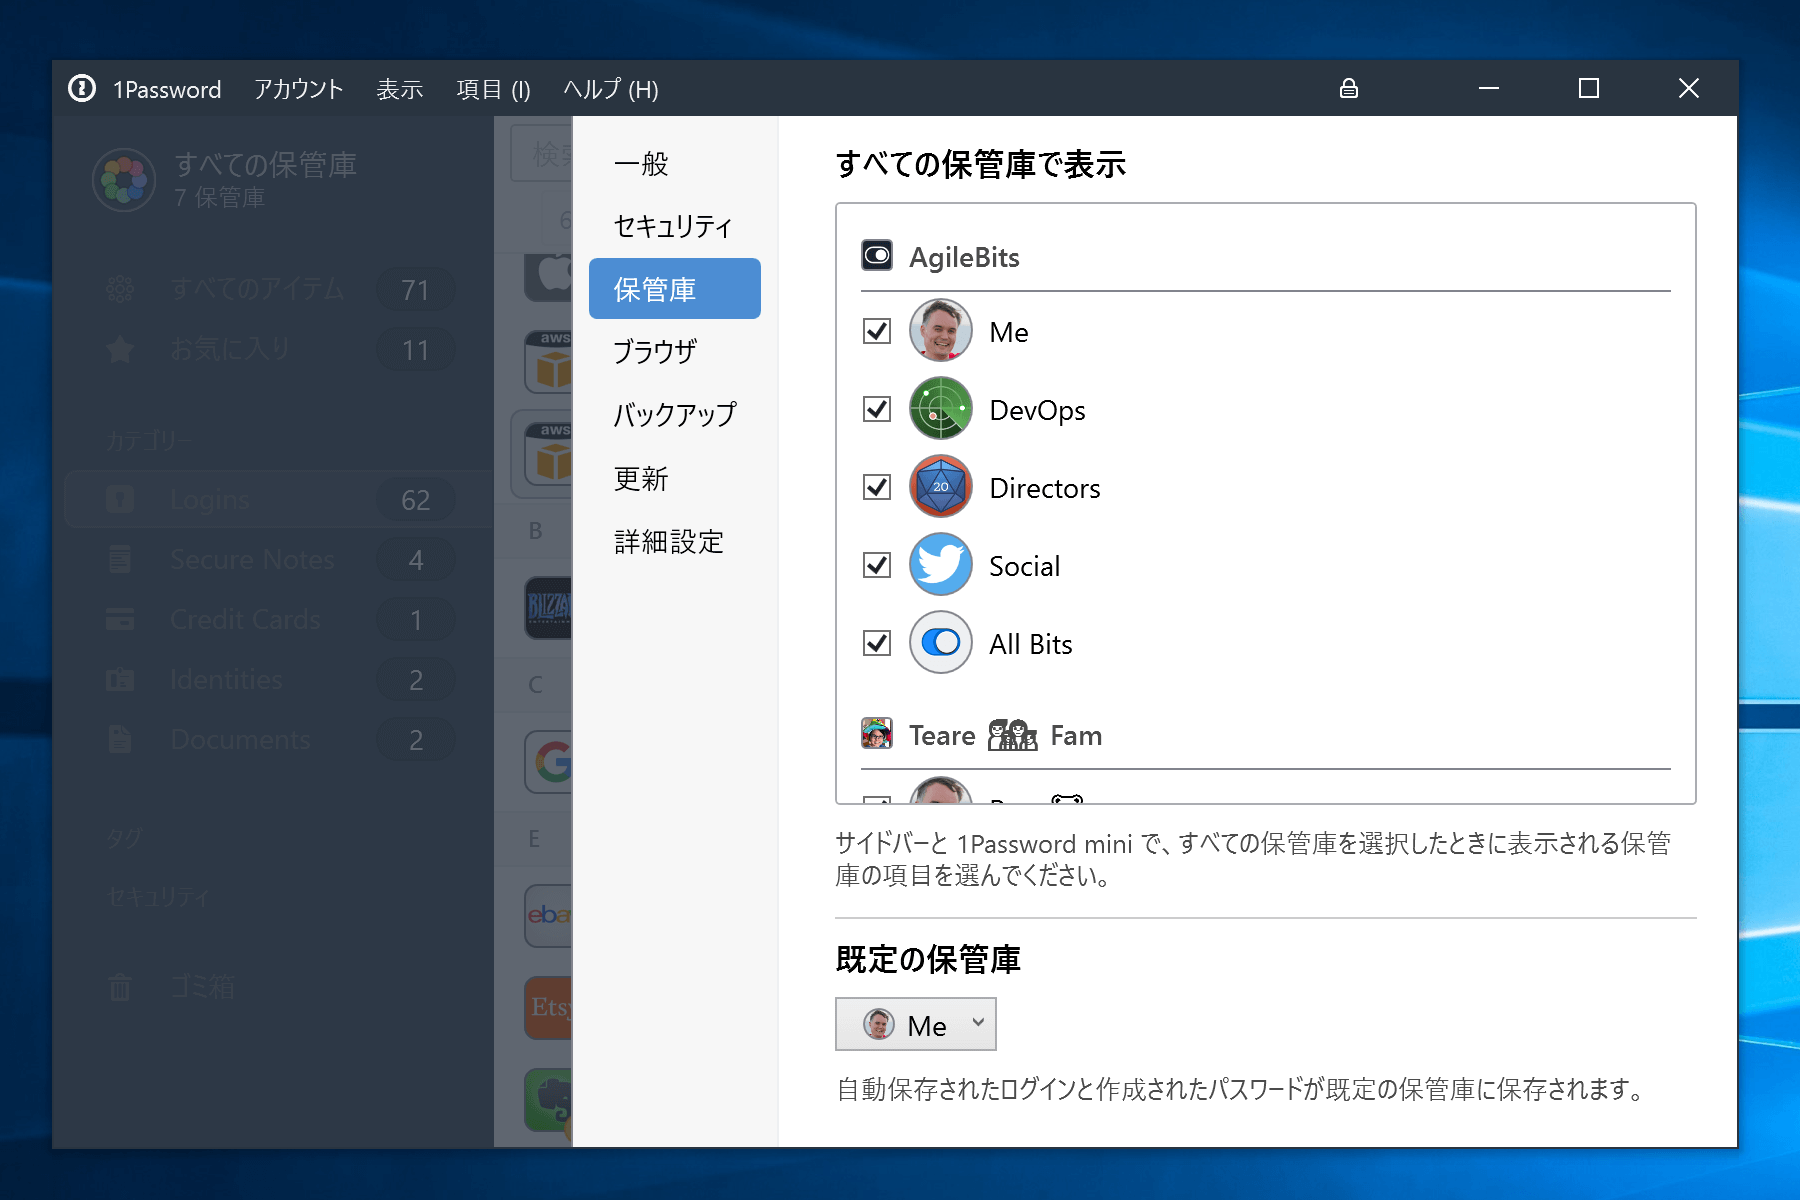 1Password main window in Japanese with the settings window open